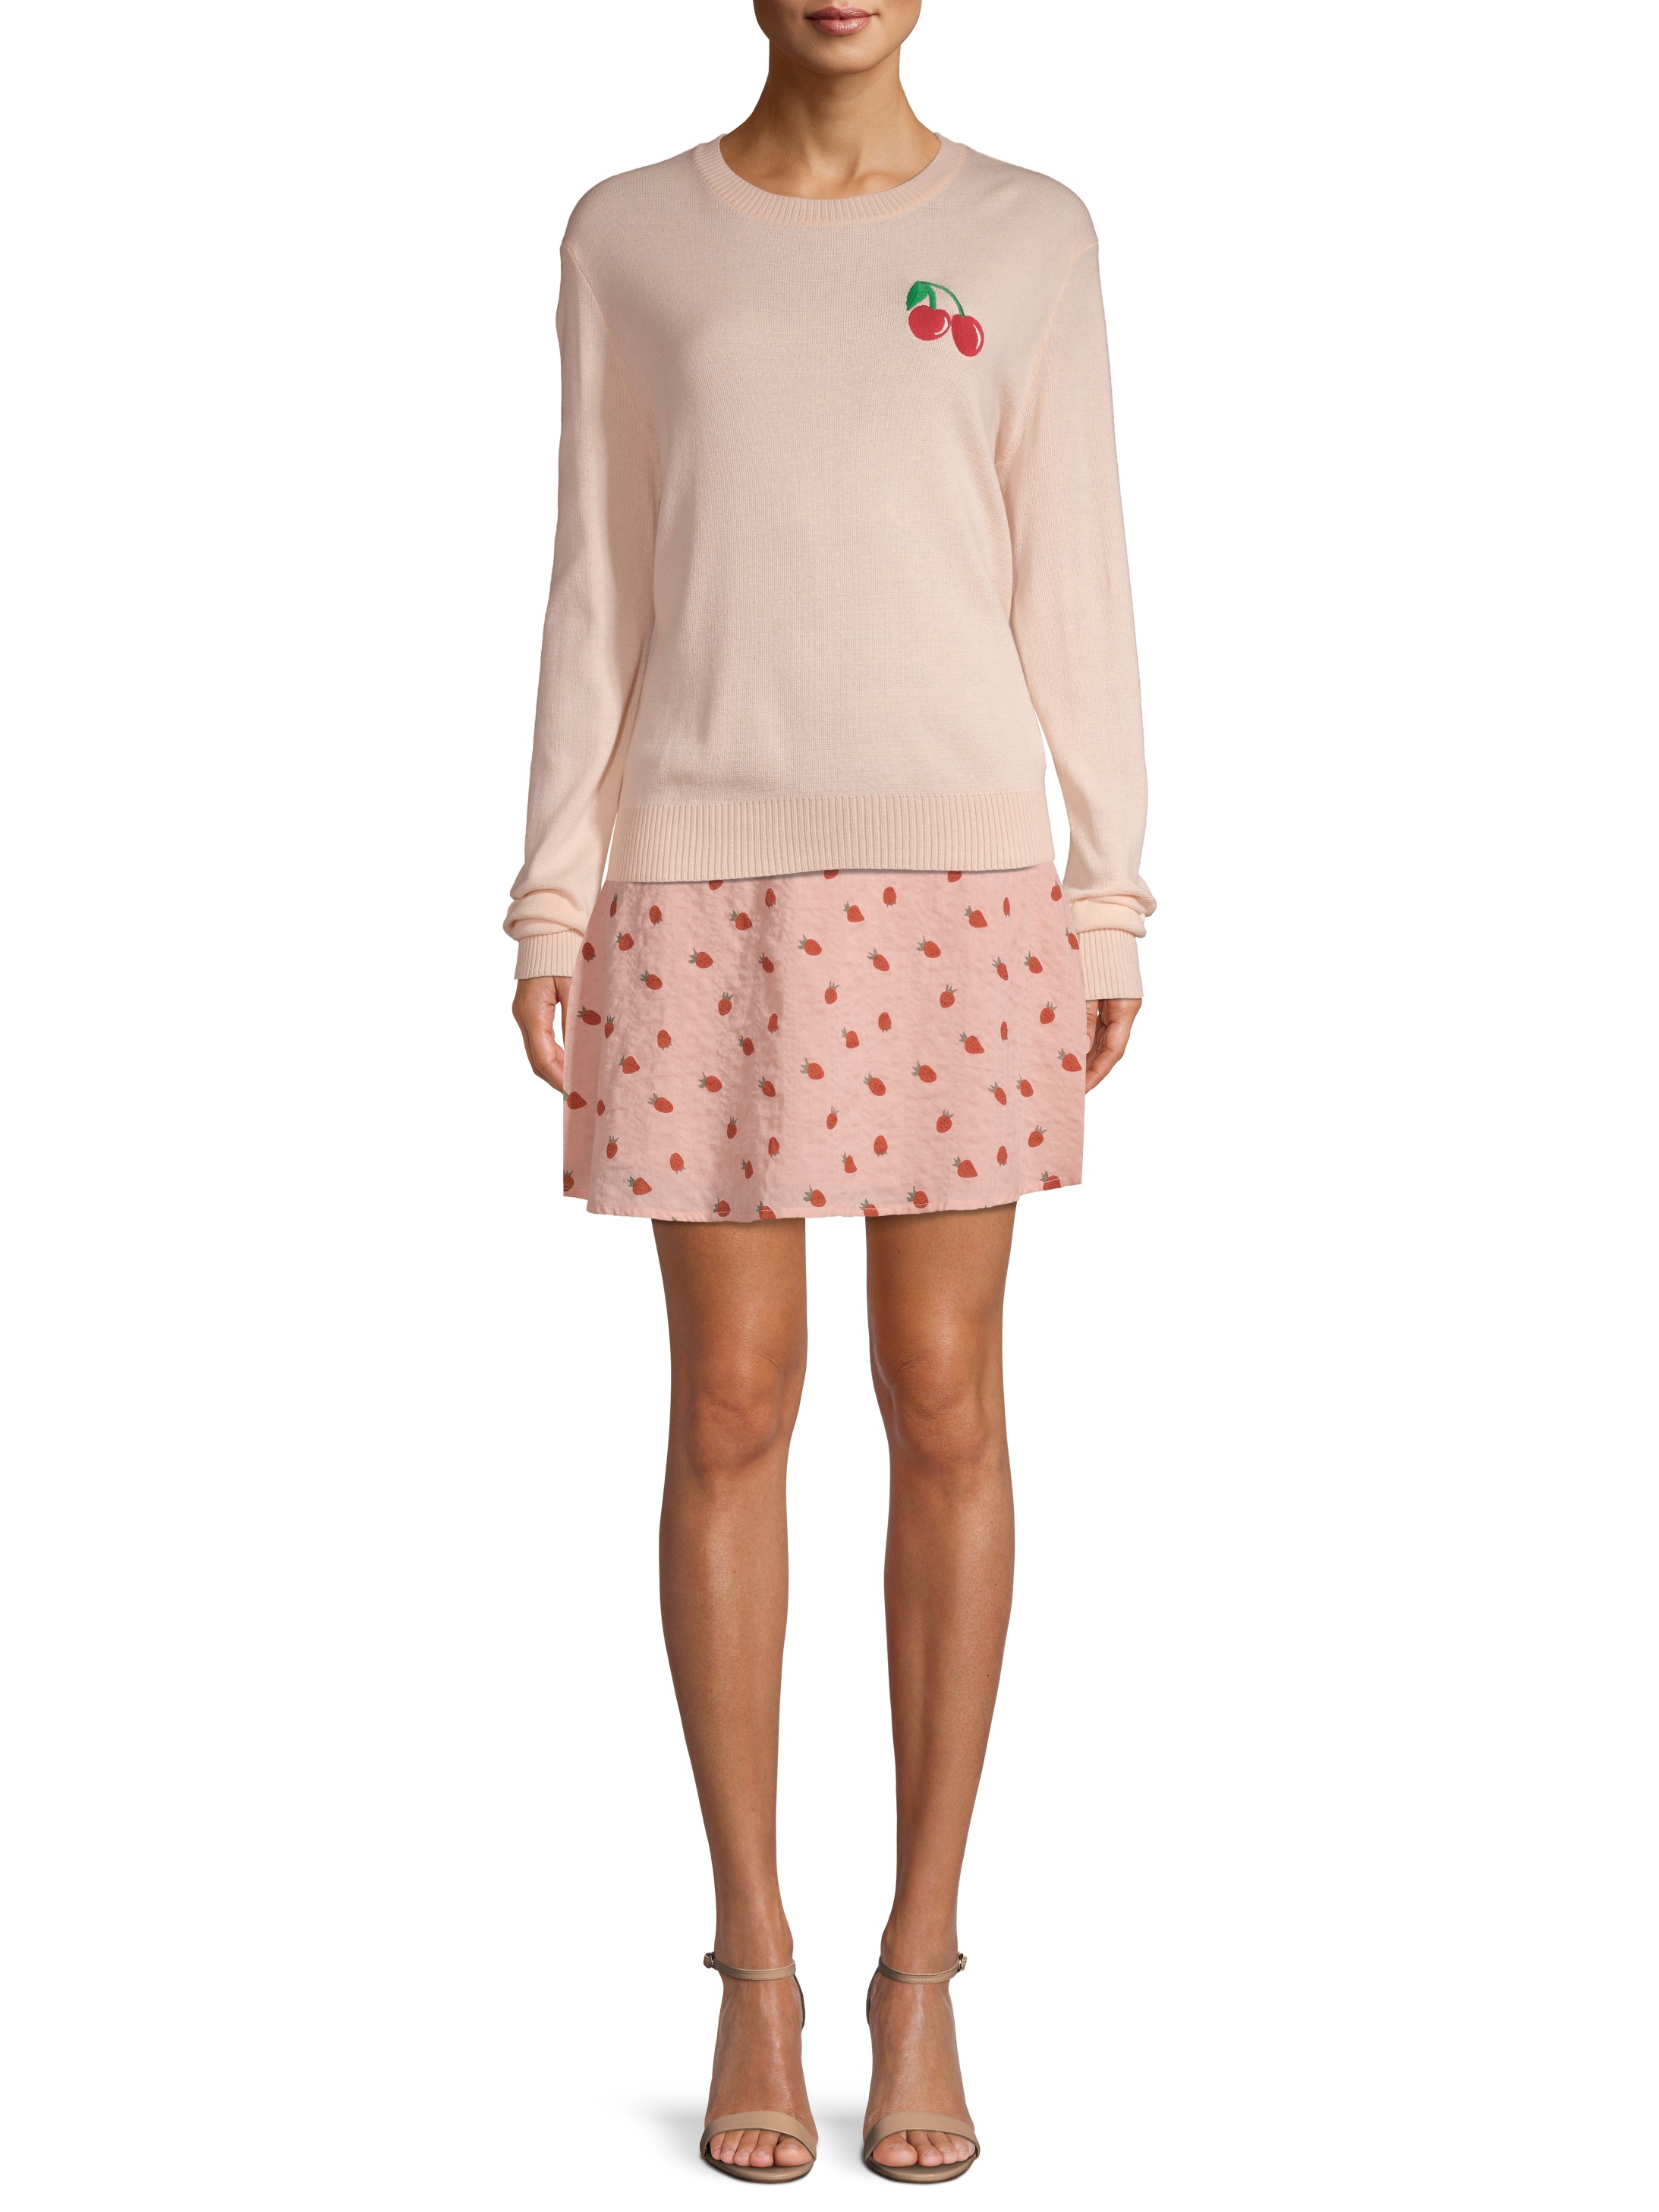 Love Sadie Women's Embroidered Sweater - image 2 of 7